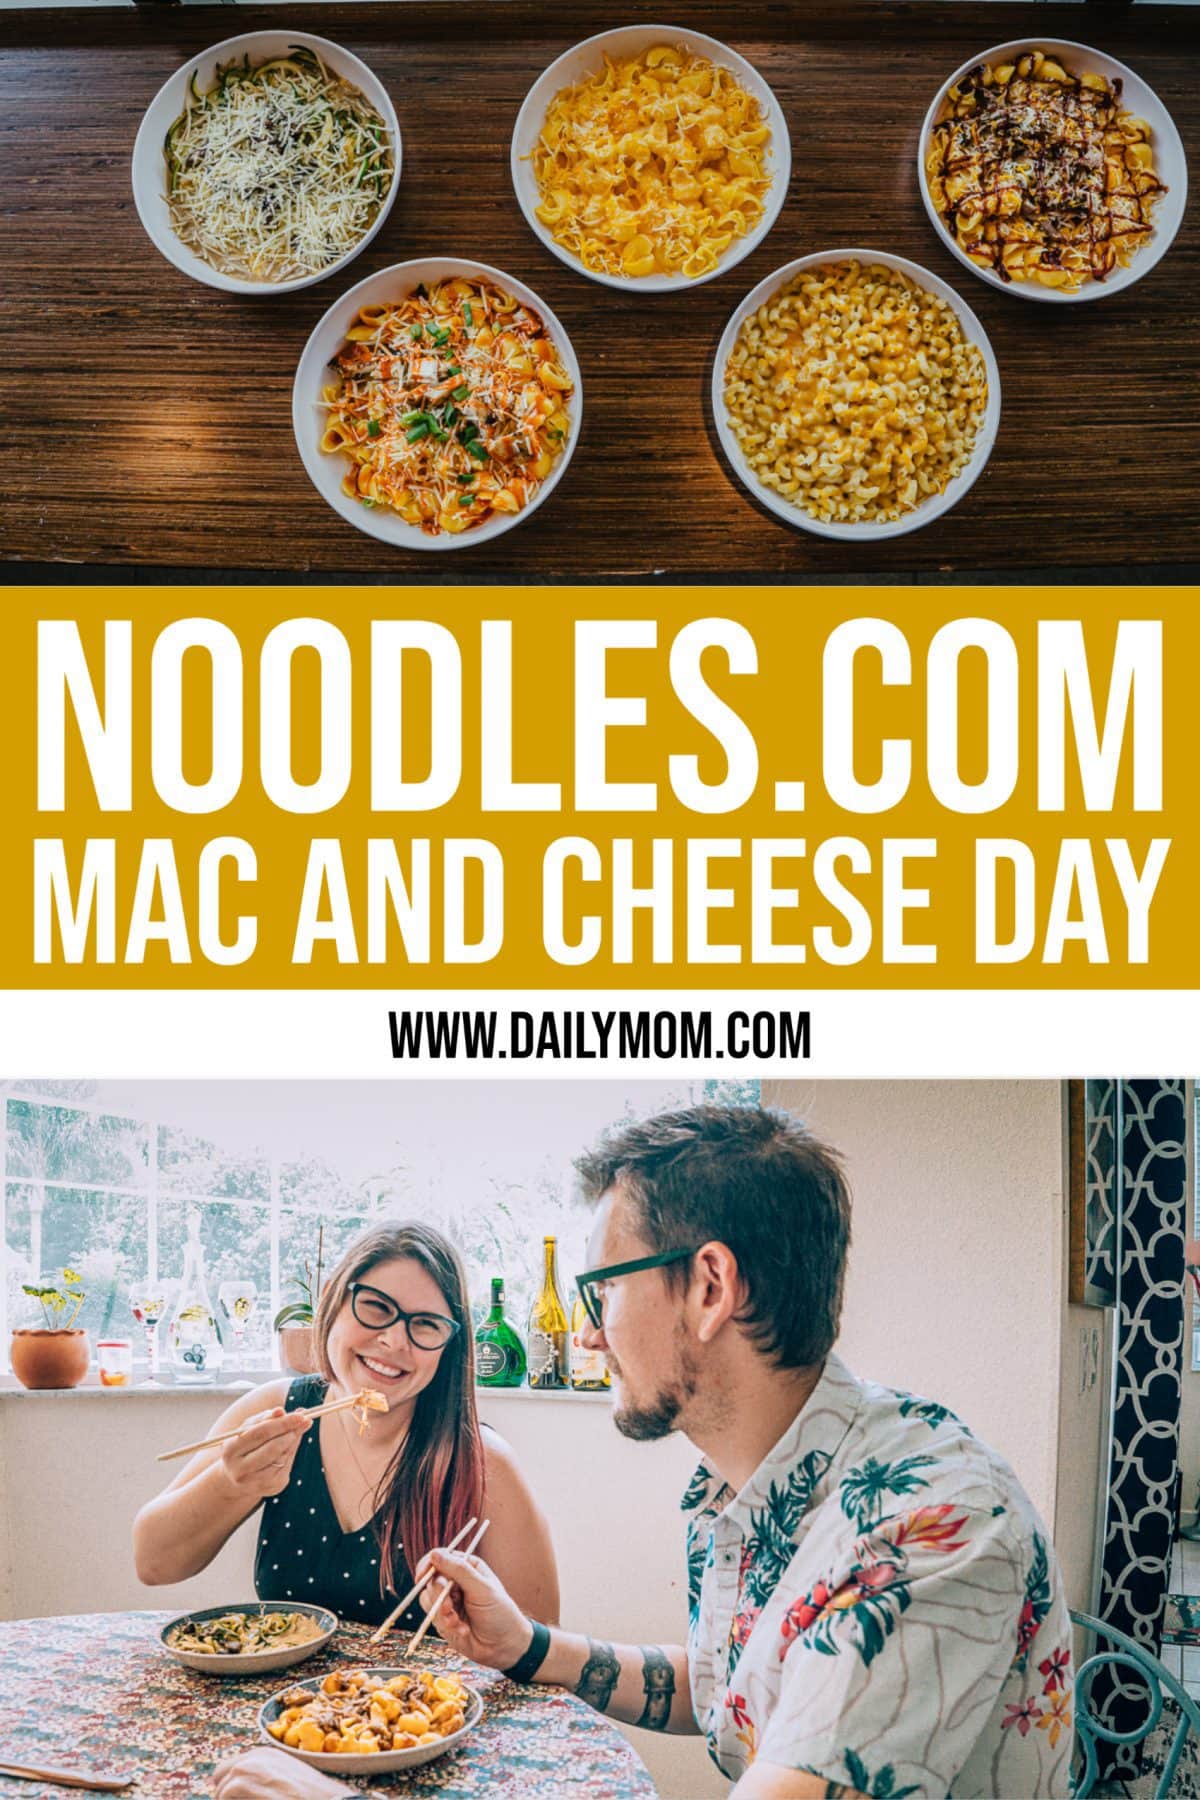 Noodles Mac And Cheese On July 14Th!